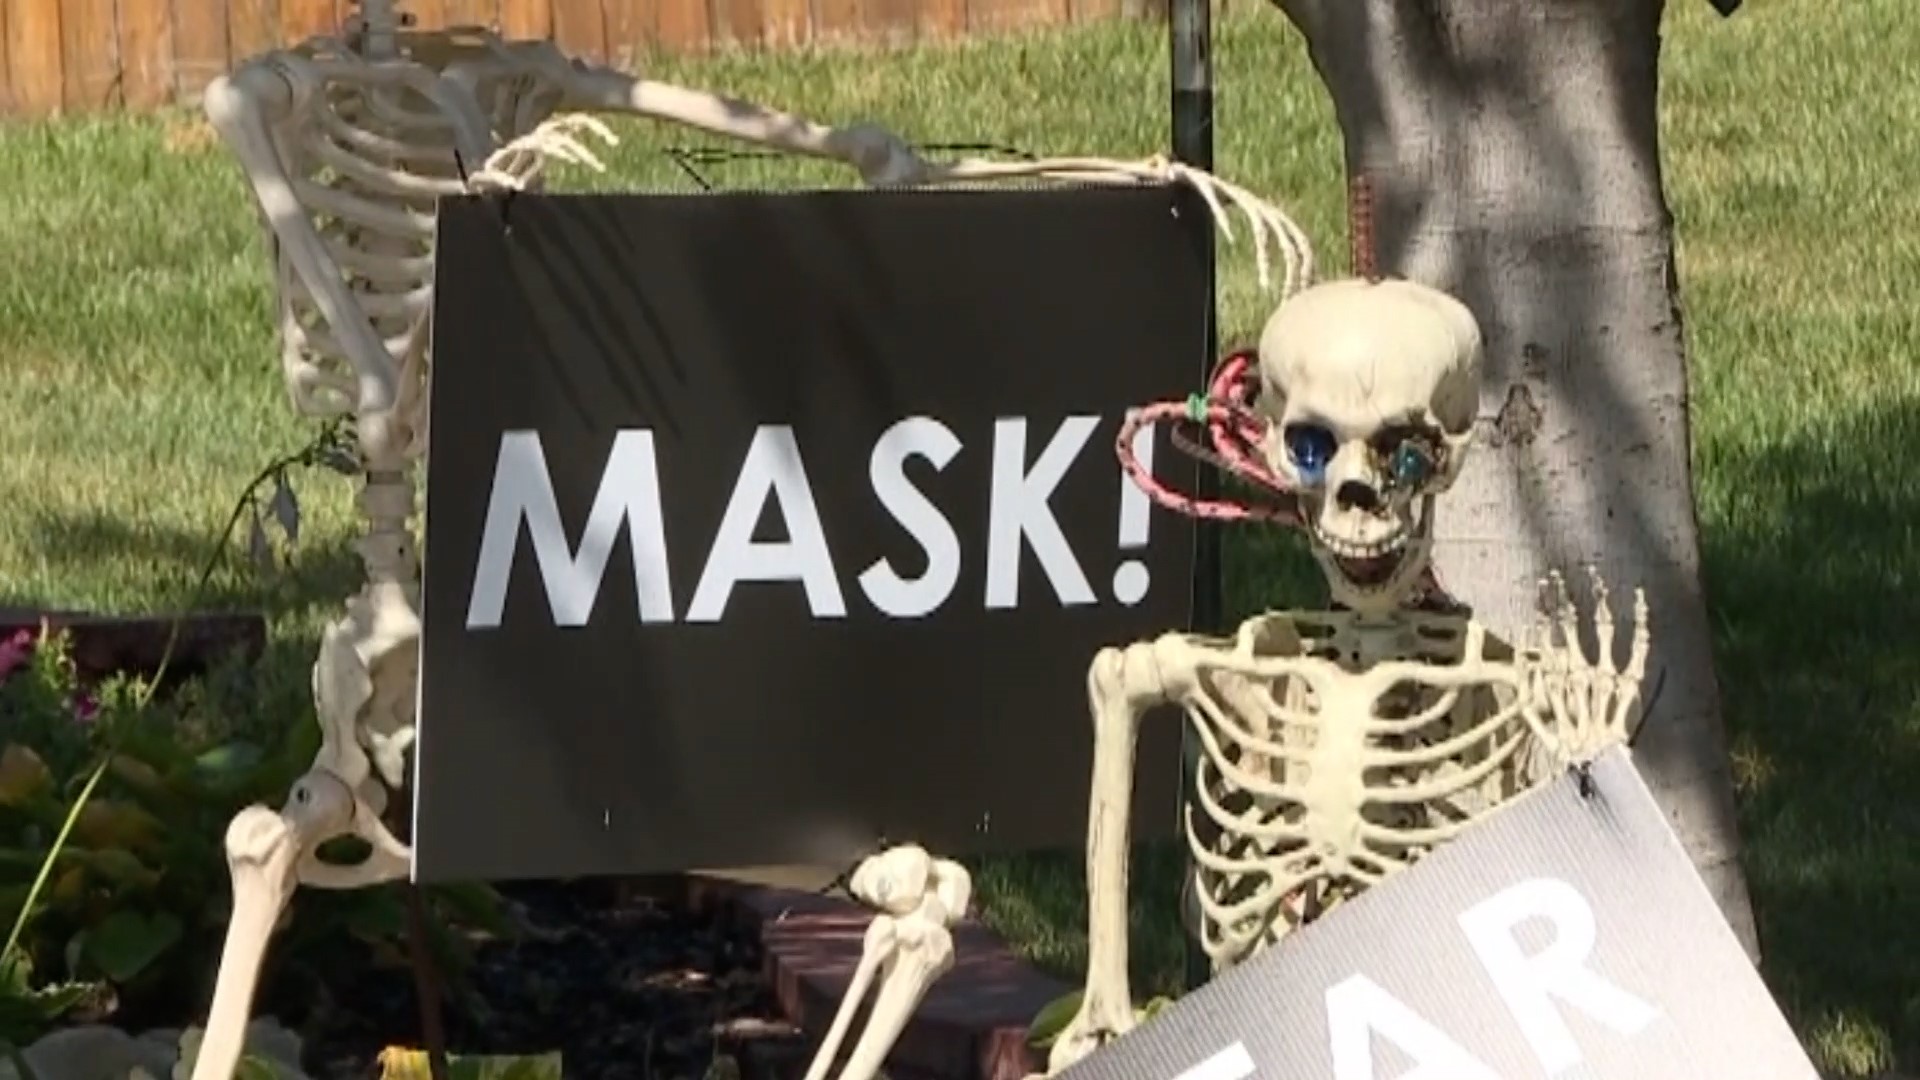 If you want to wear a costume mask, you can, but health officials say you must still wear a face covering under it.